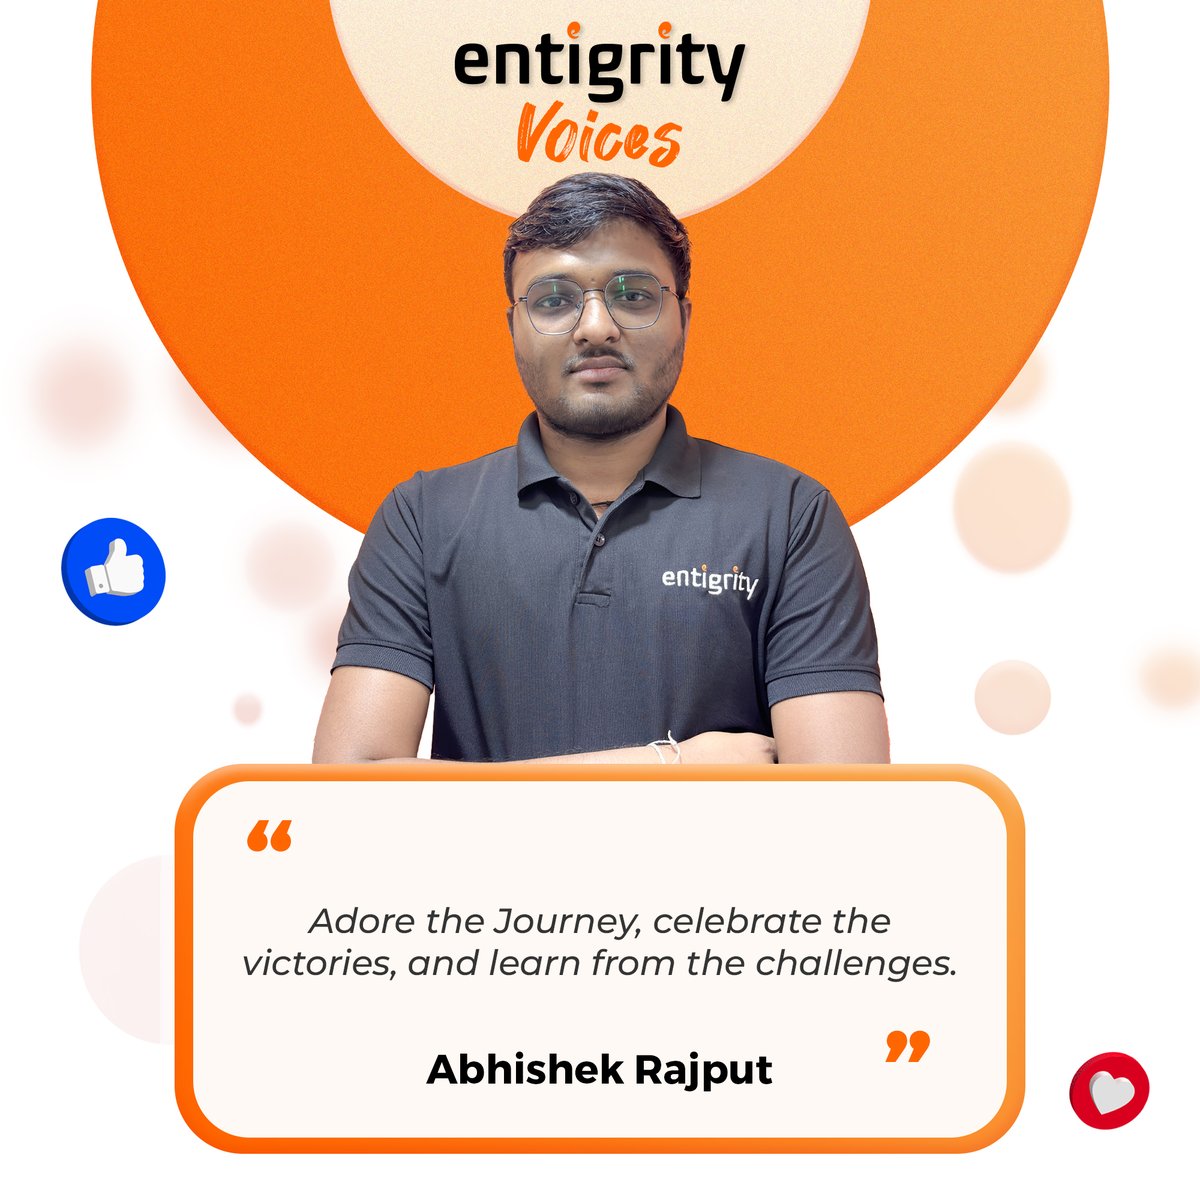 Every day at Entigrity allows us to celebrate the achievements and conquer challenges with smiling faces. Proud to be an Entigritians! #Entigrity #WorkingTogether #WorkChallenges